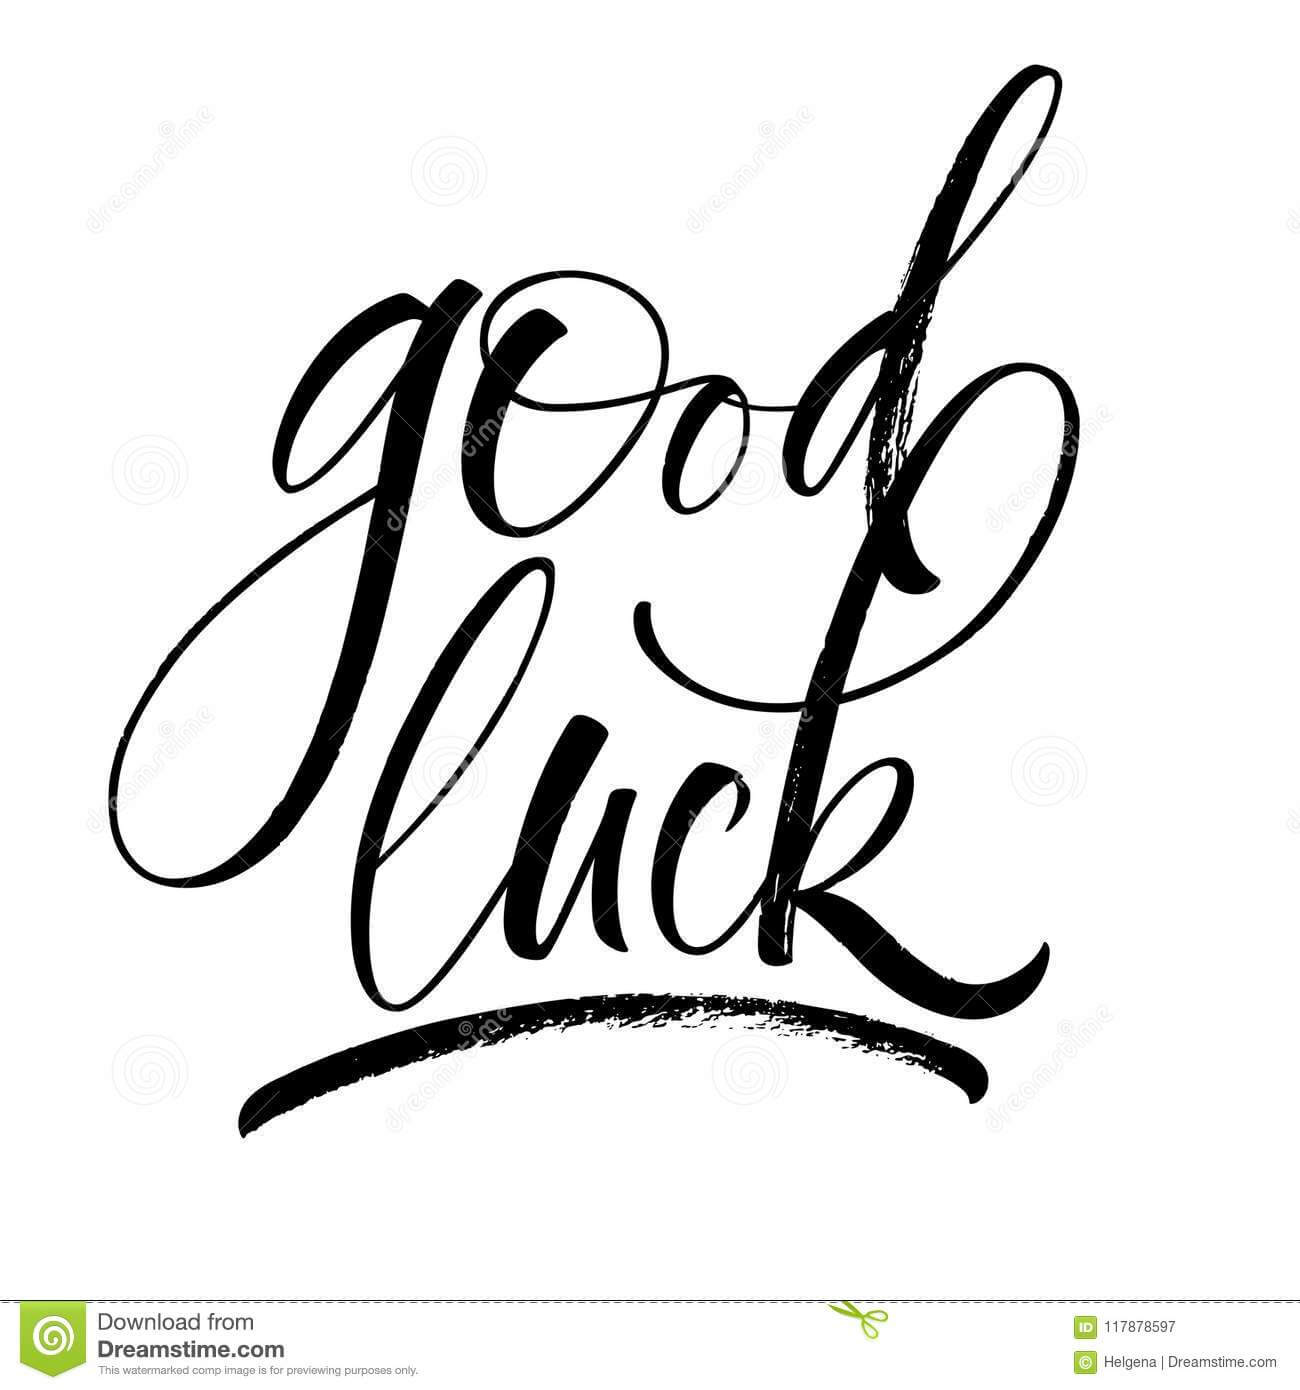 Good Luck Lettering Stock Vector. Illustration Of Best With Good Luck Card Templates